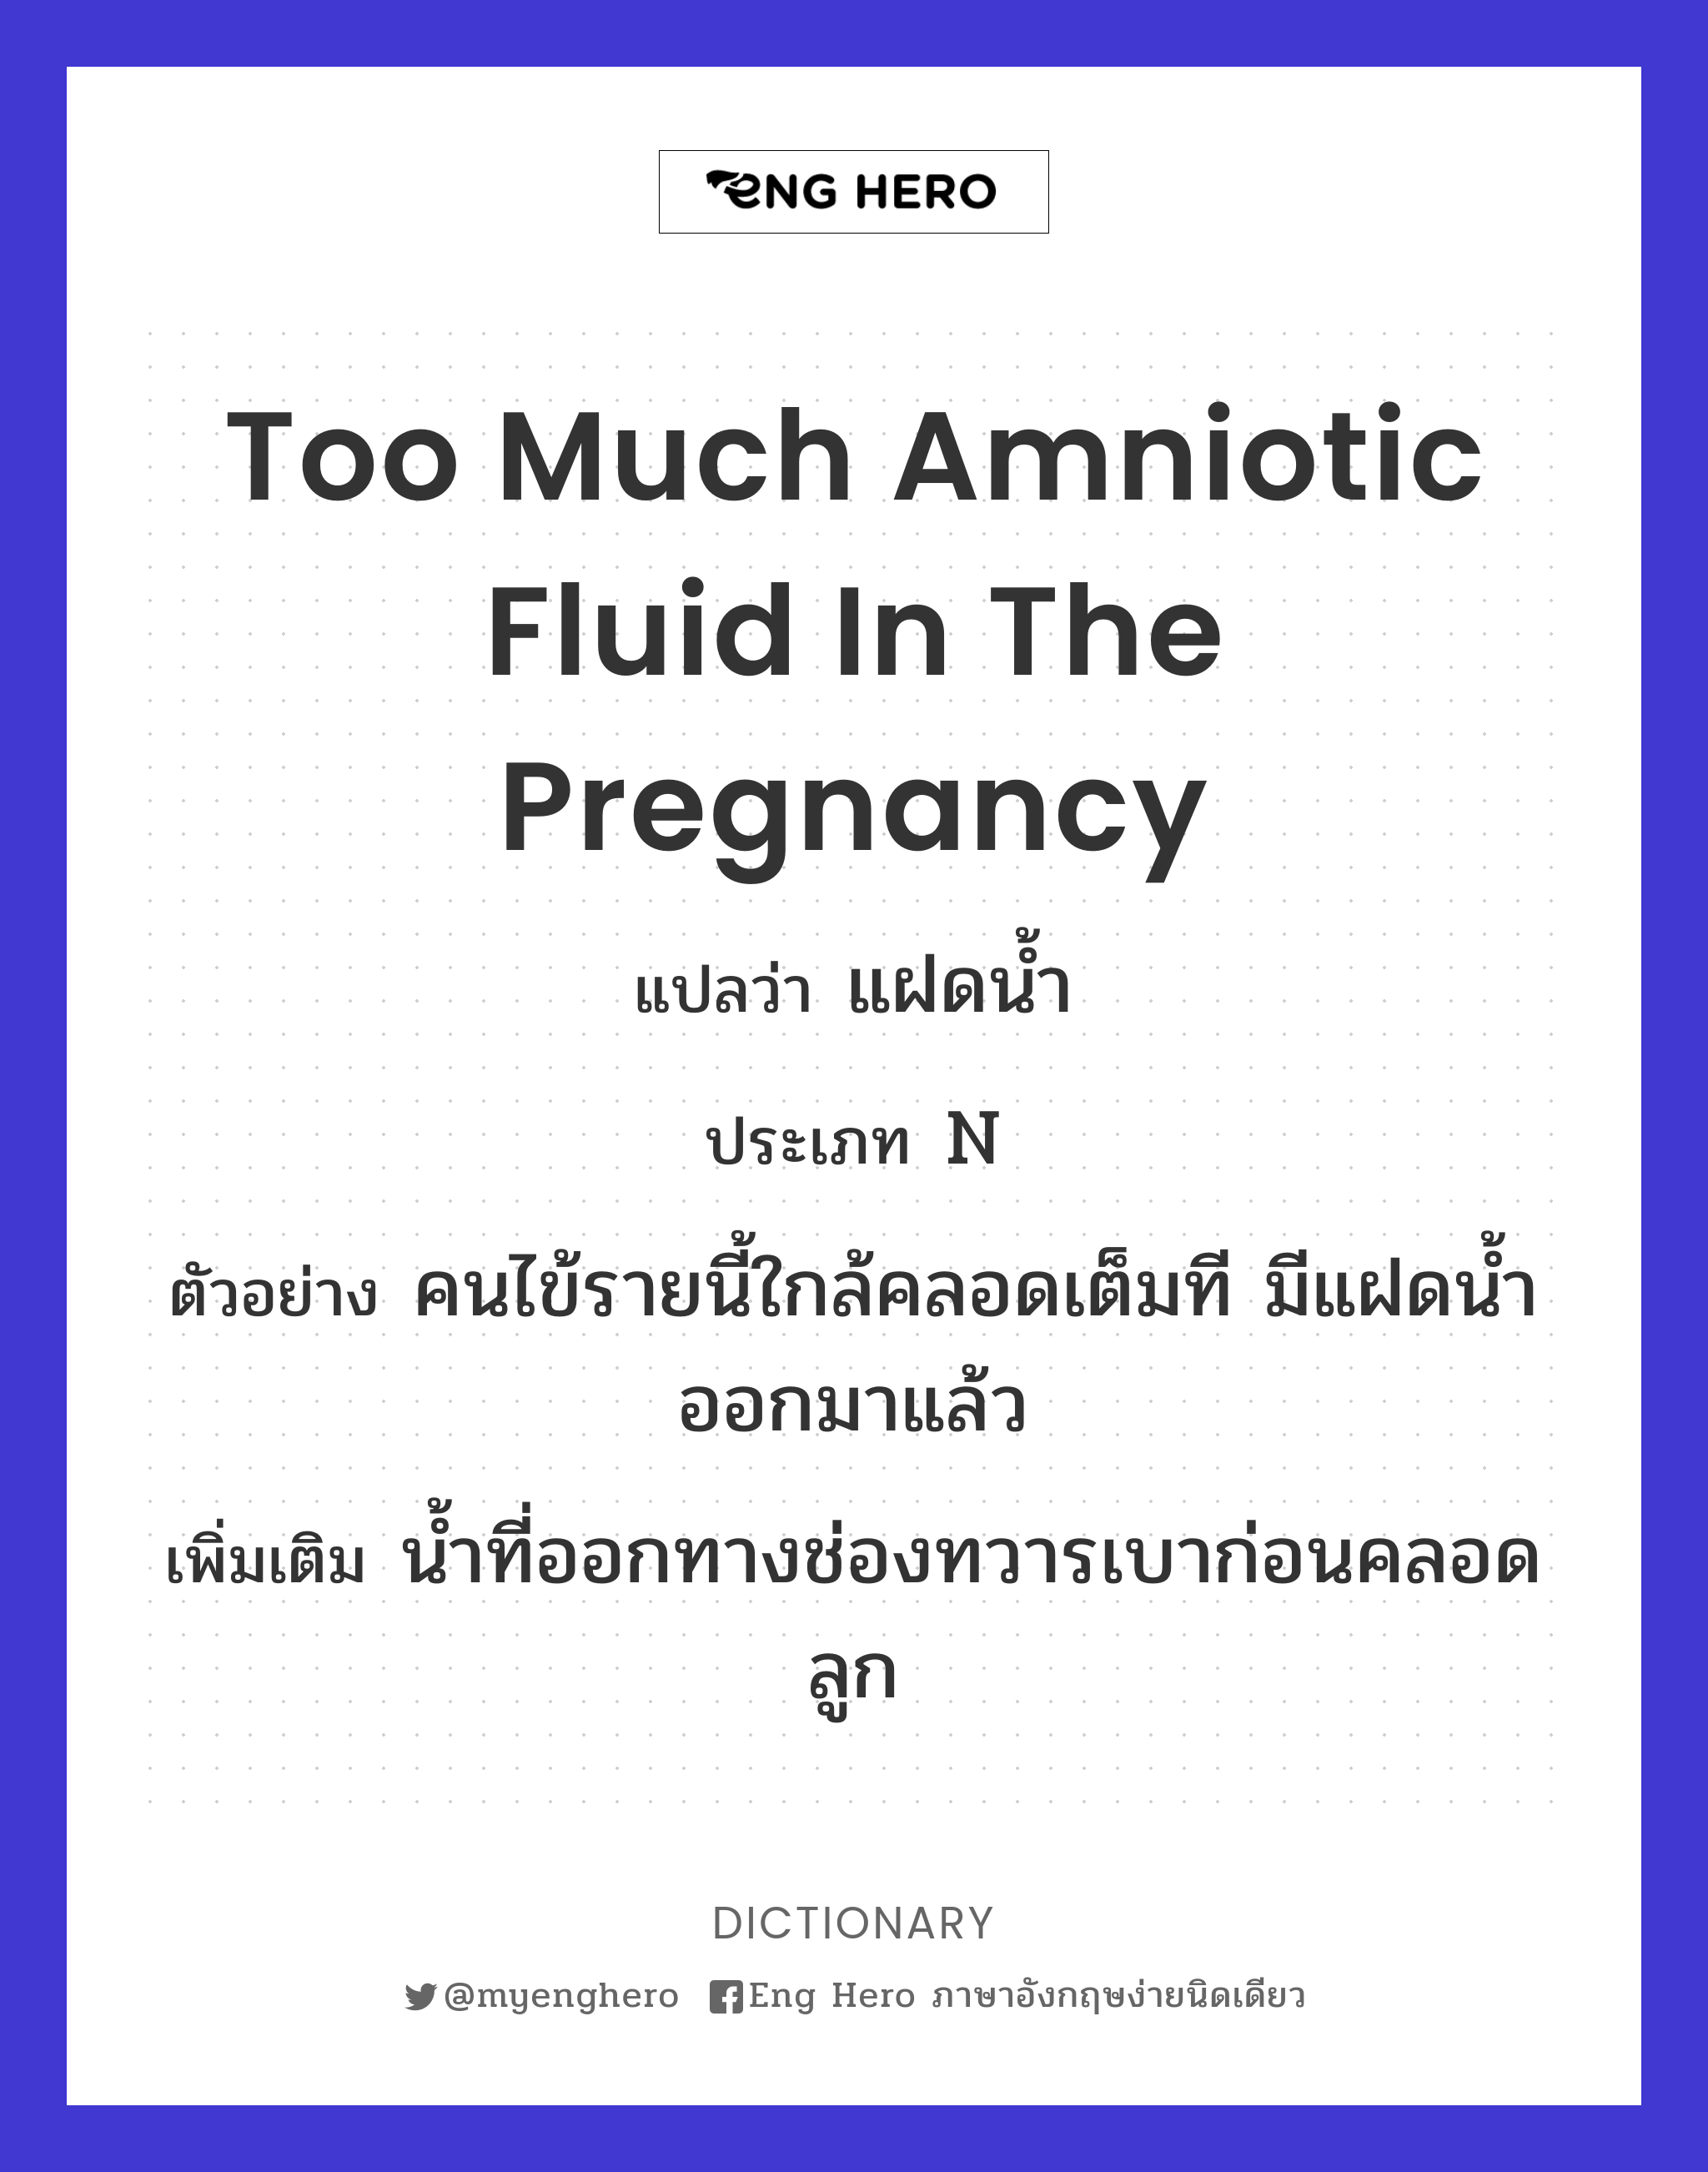 too much amniotic fluid in the pregnancy